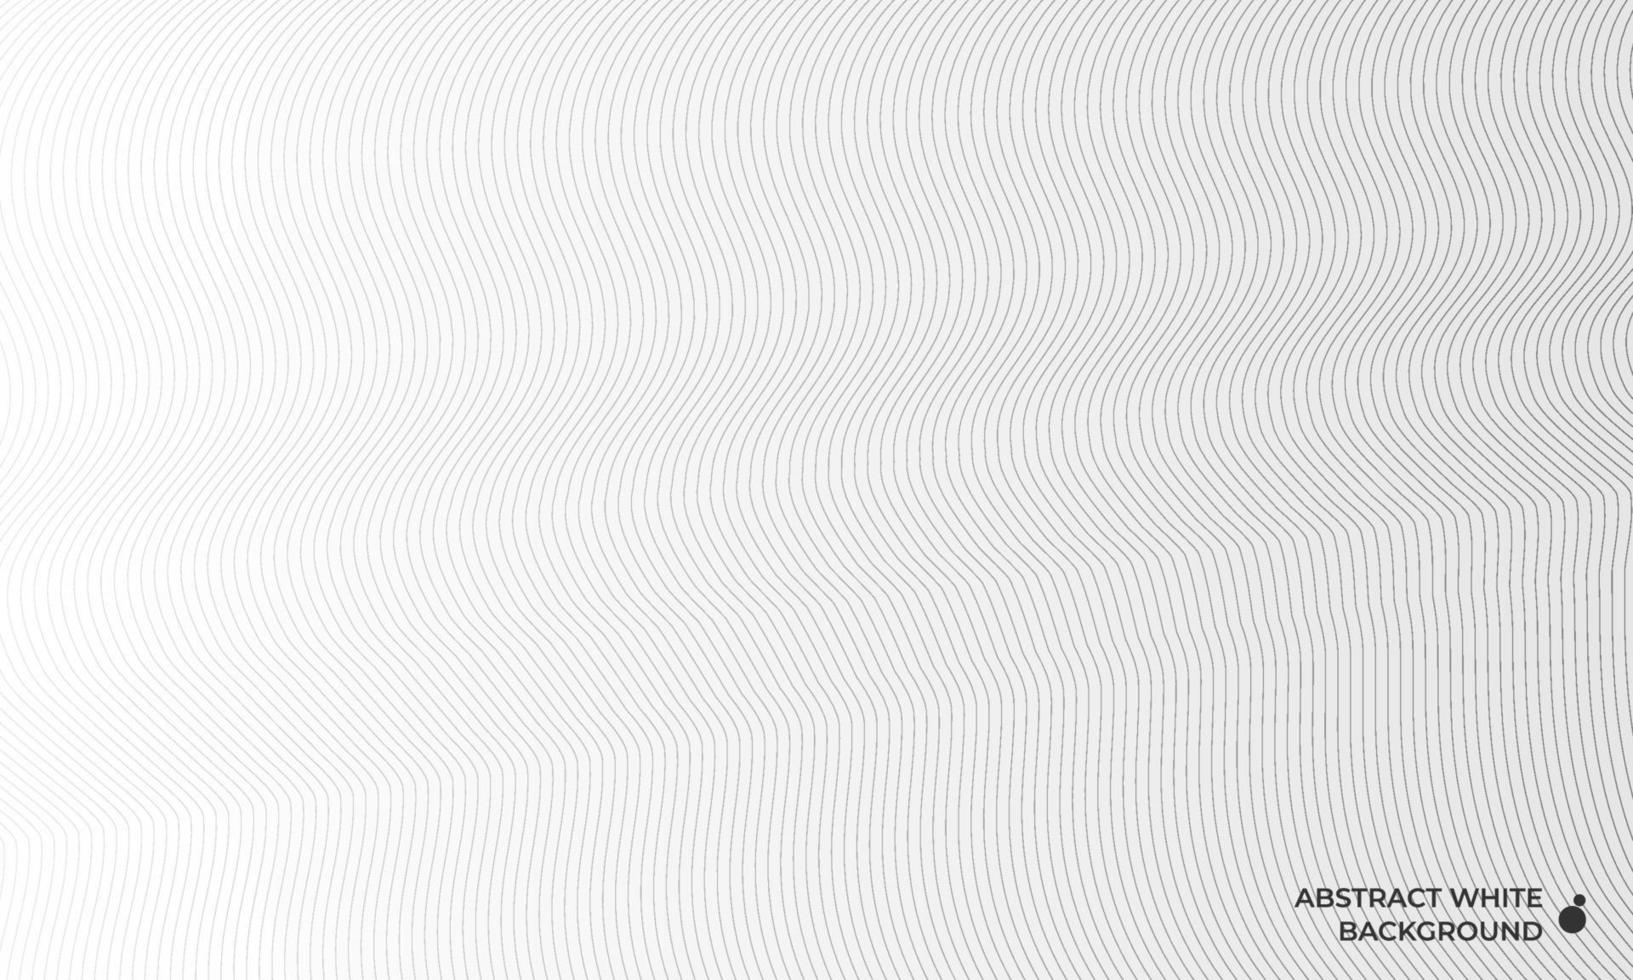 Abstract white background with wavy gray line wave vector